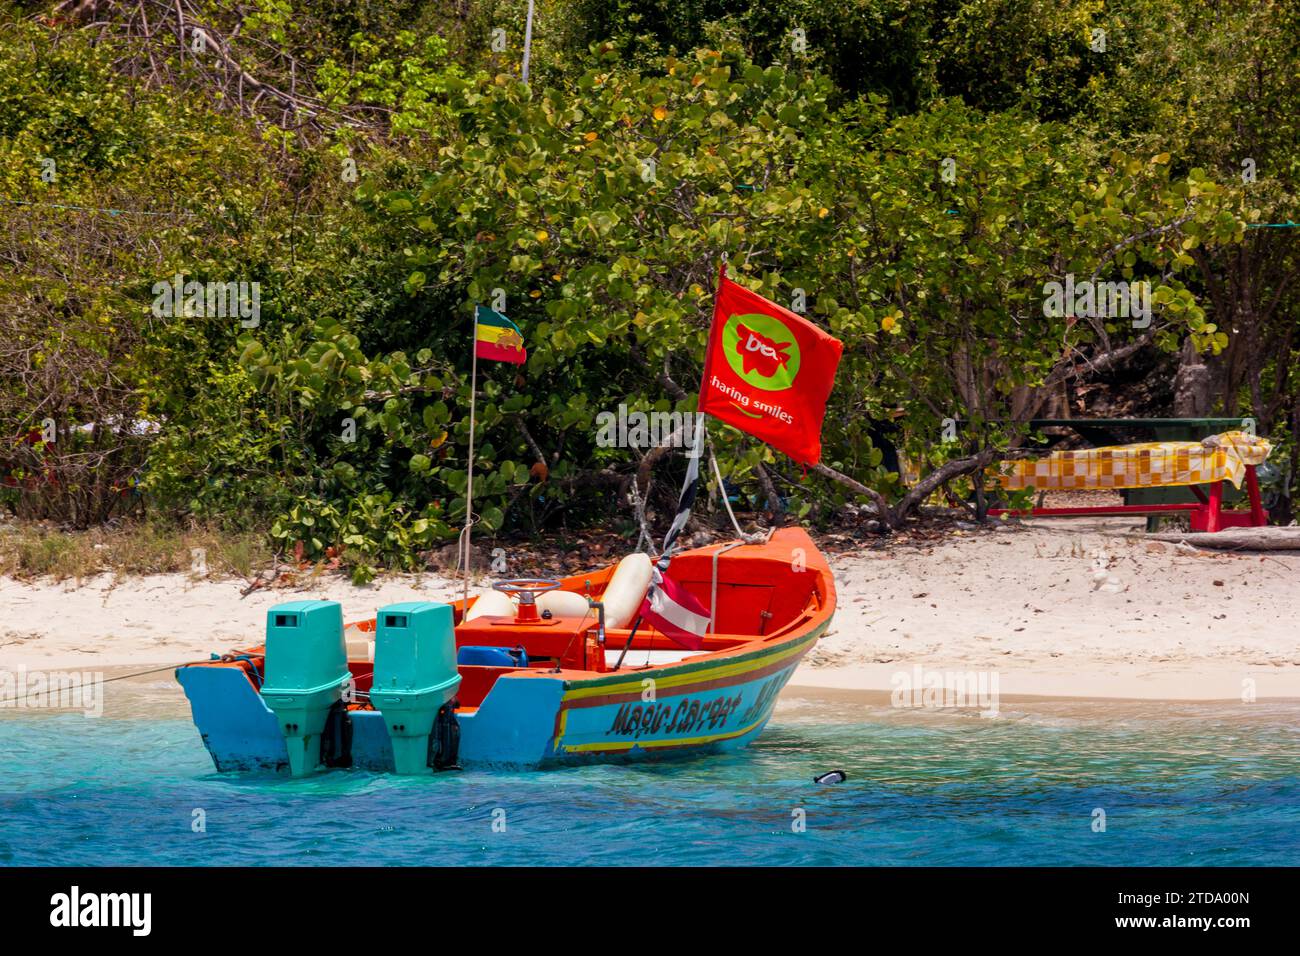 Mr Fabulous – Magic Carpet Water Taxi Moored on the Island Beach of Petit Rameau at the Tobago Cays Marine Park, The Grenadines, Eastern Caribbean. Stock Photo